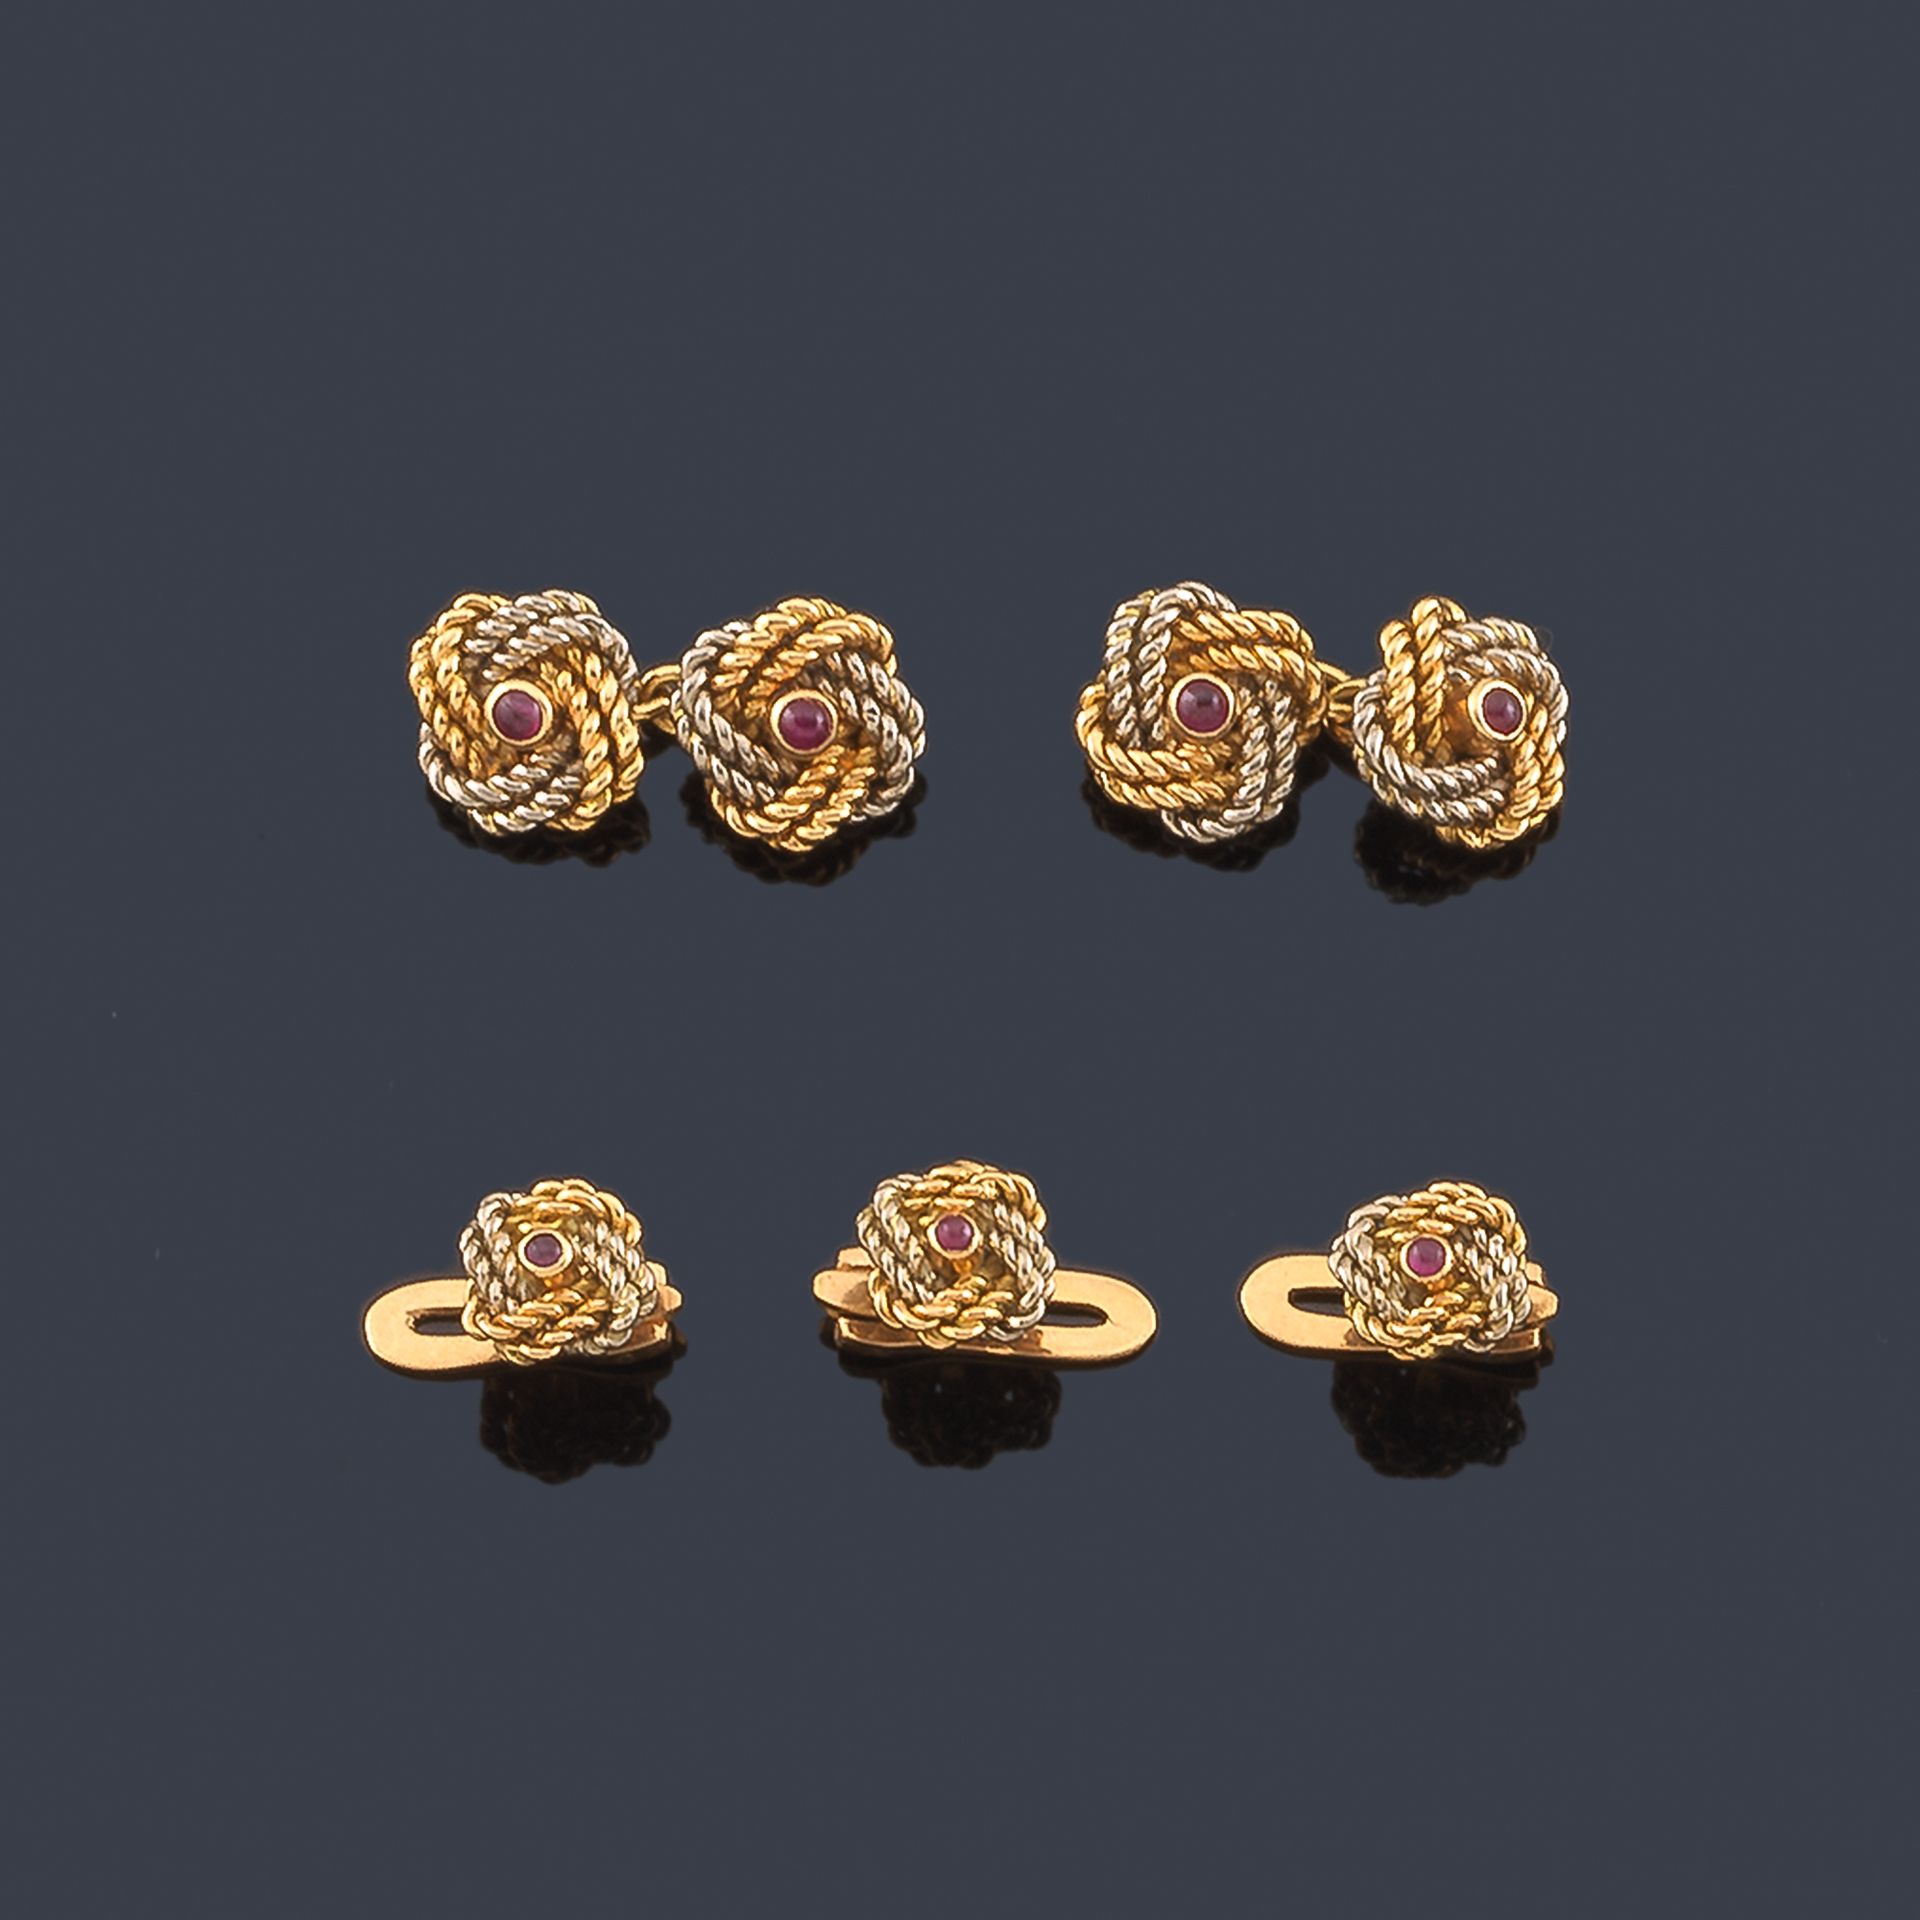 LUIS GIL Cufflinks and knot-shaped buttons made in 18K white and yellow gold wit&hellip;